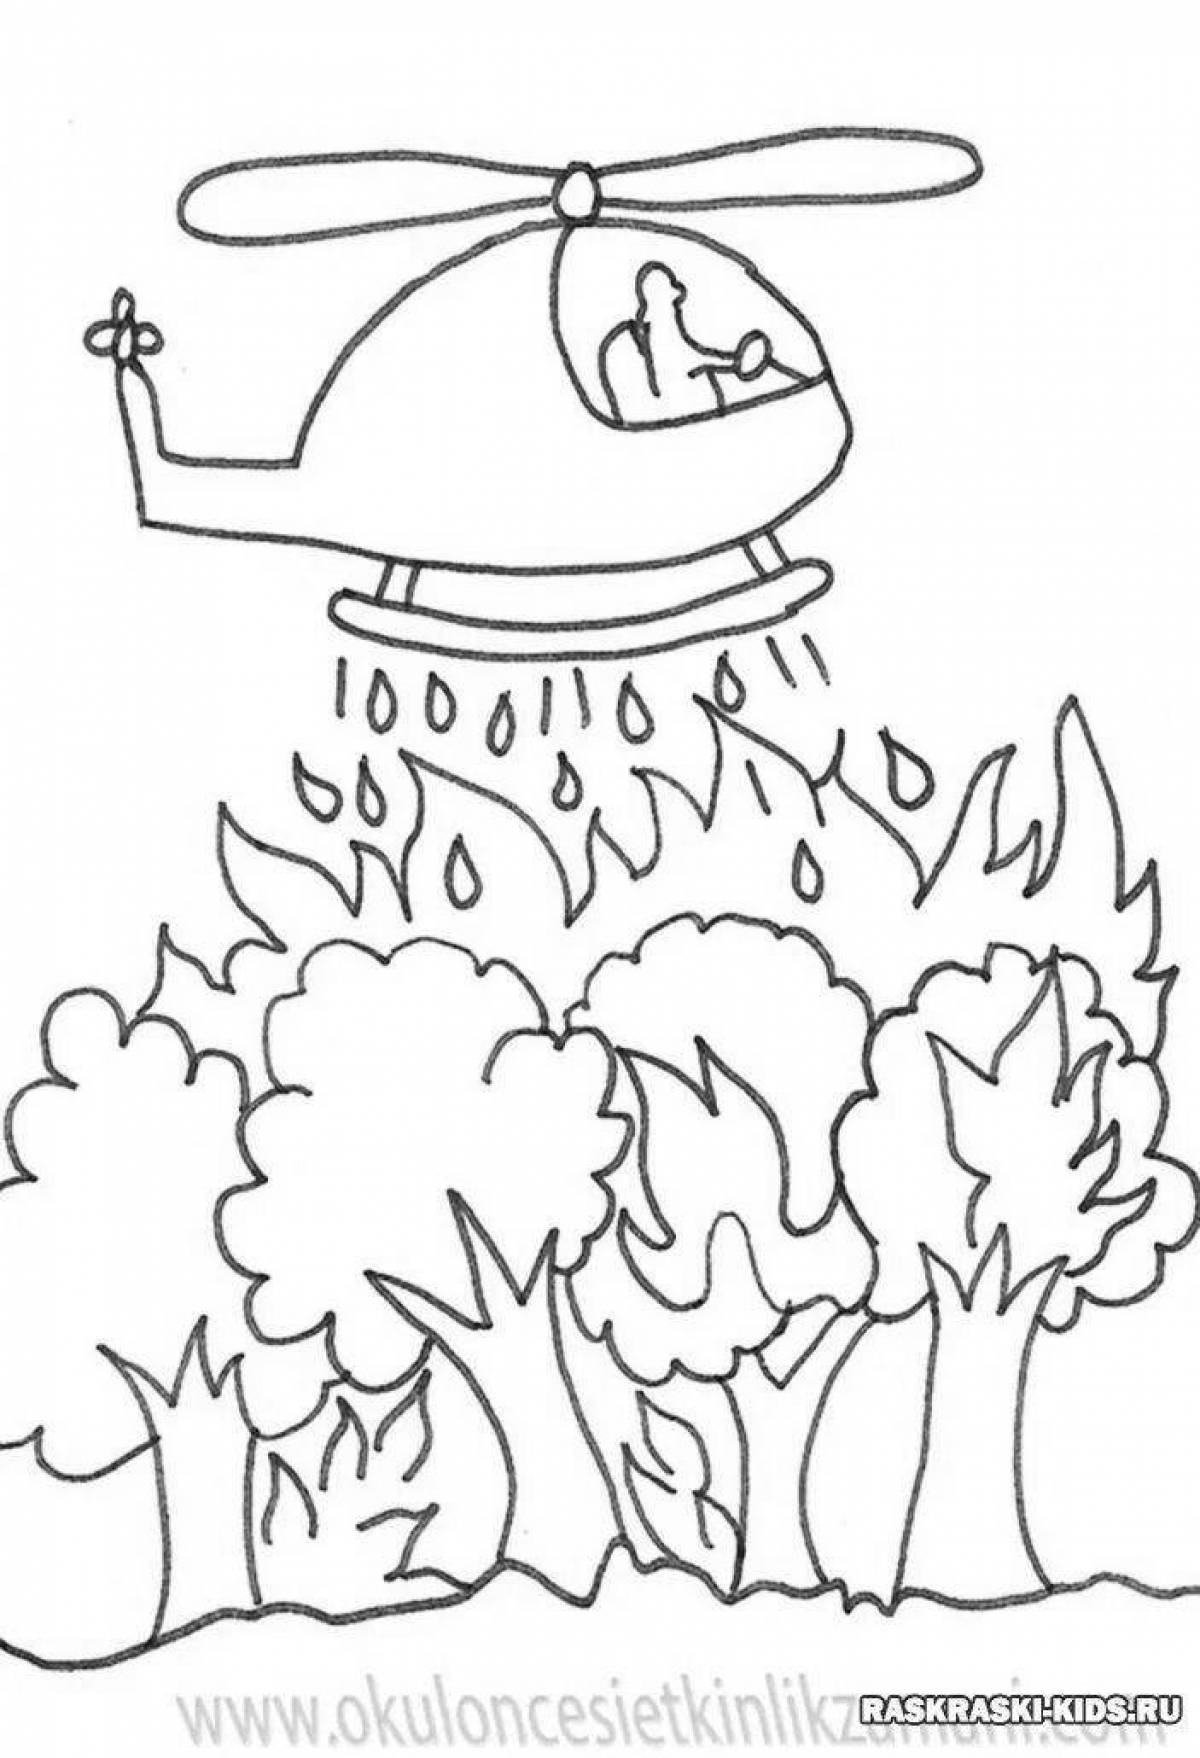 Colorful fire safety coloring pages for 4-5 year olds